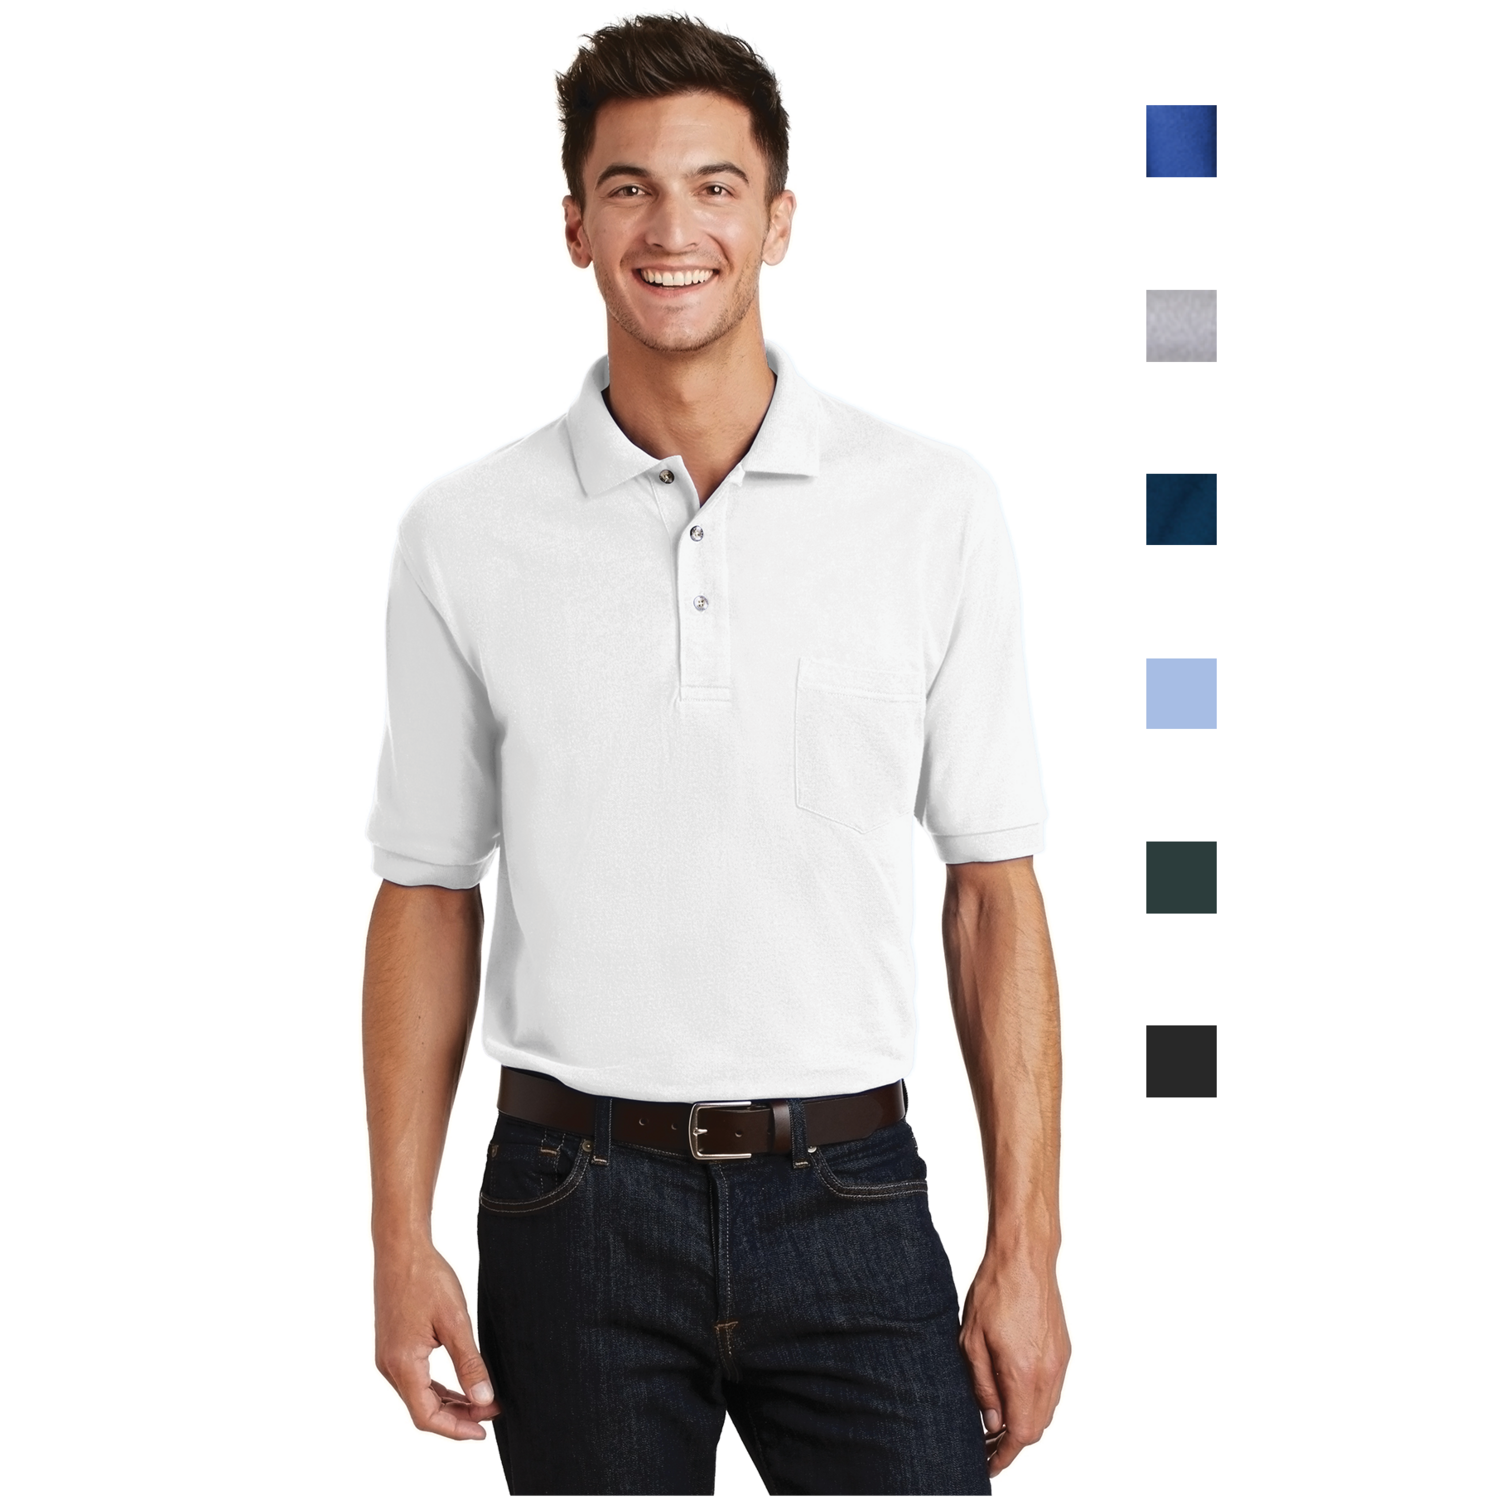 Port Authority Heavyweight Cotton Pique Polo with Pocket